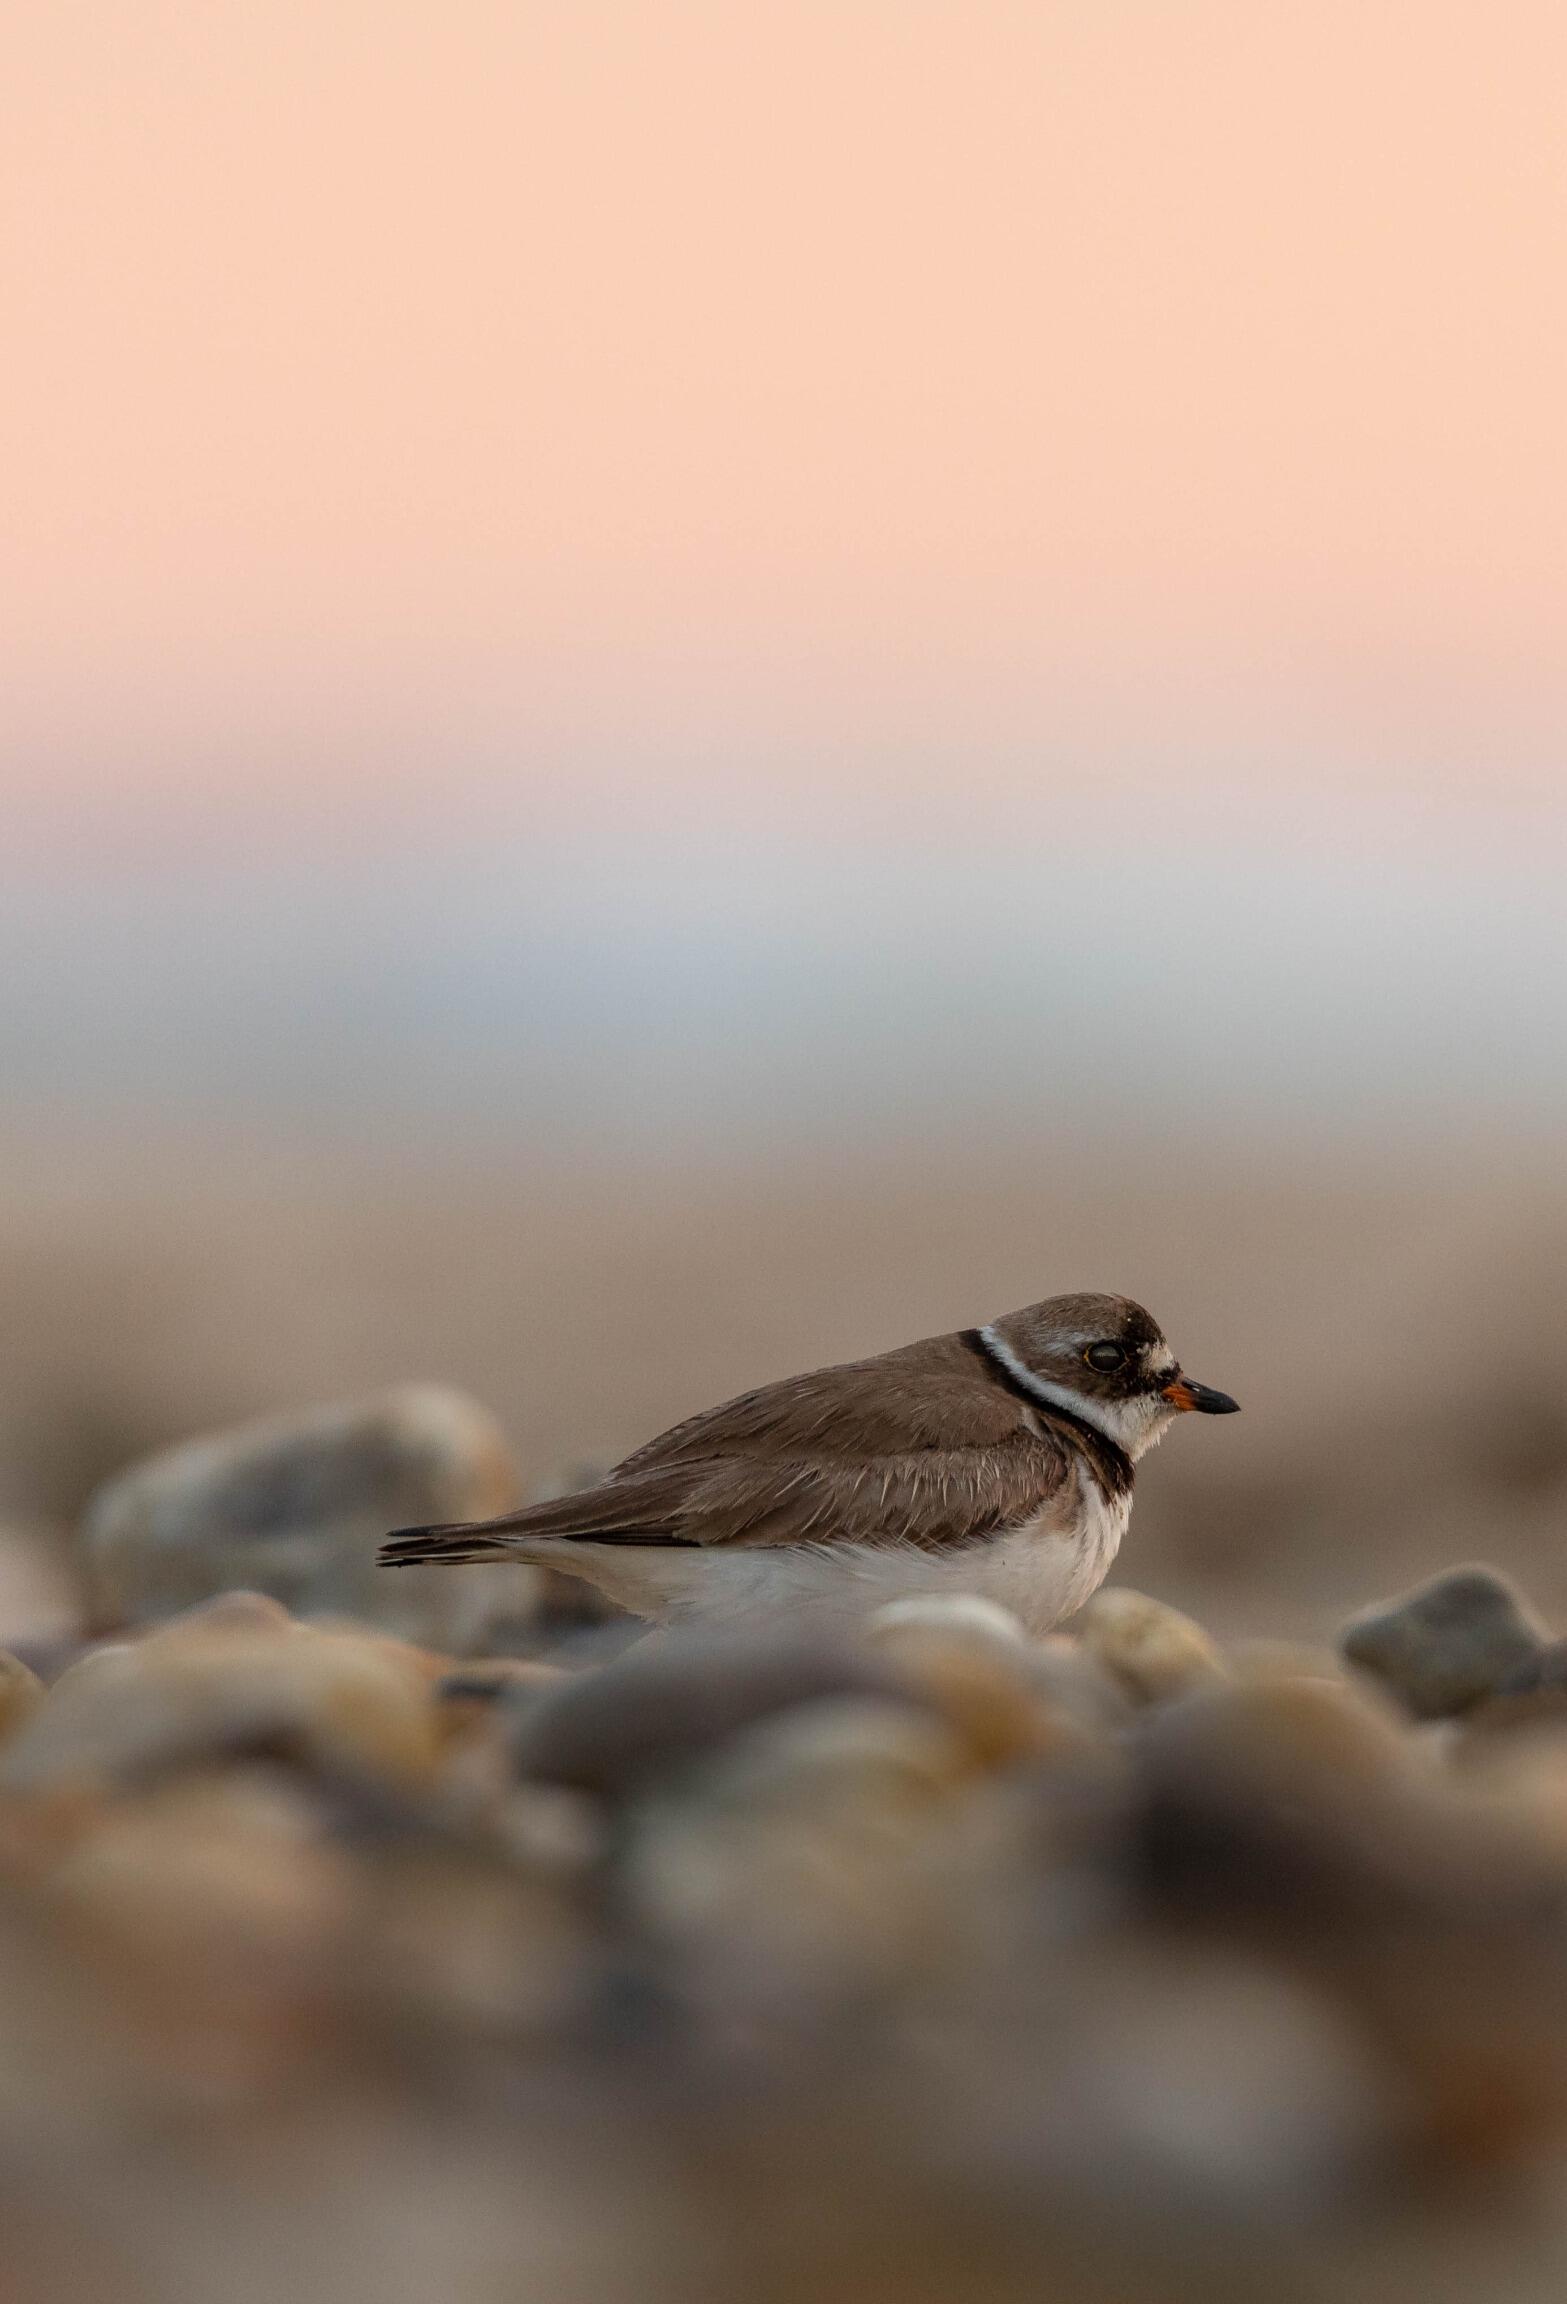 Semipalmated Plover on a rocky beach at sunset.